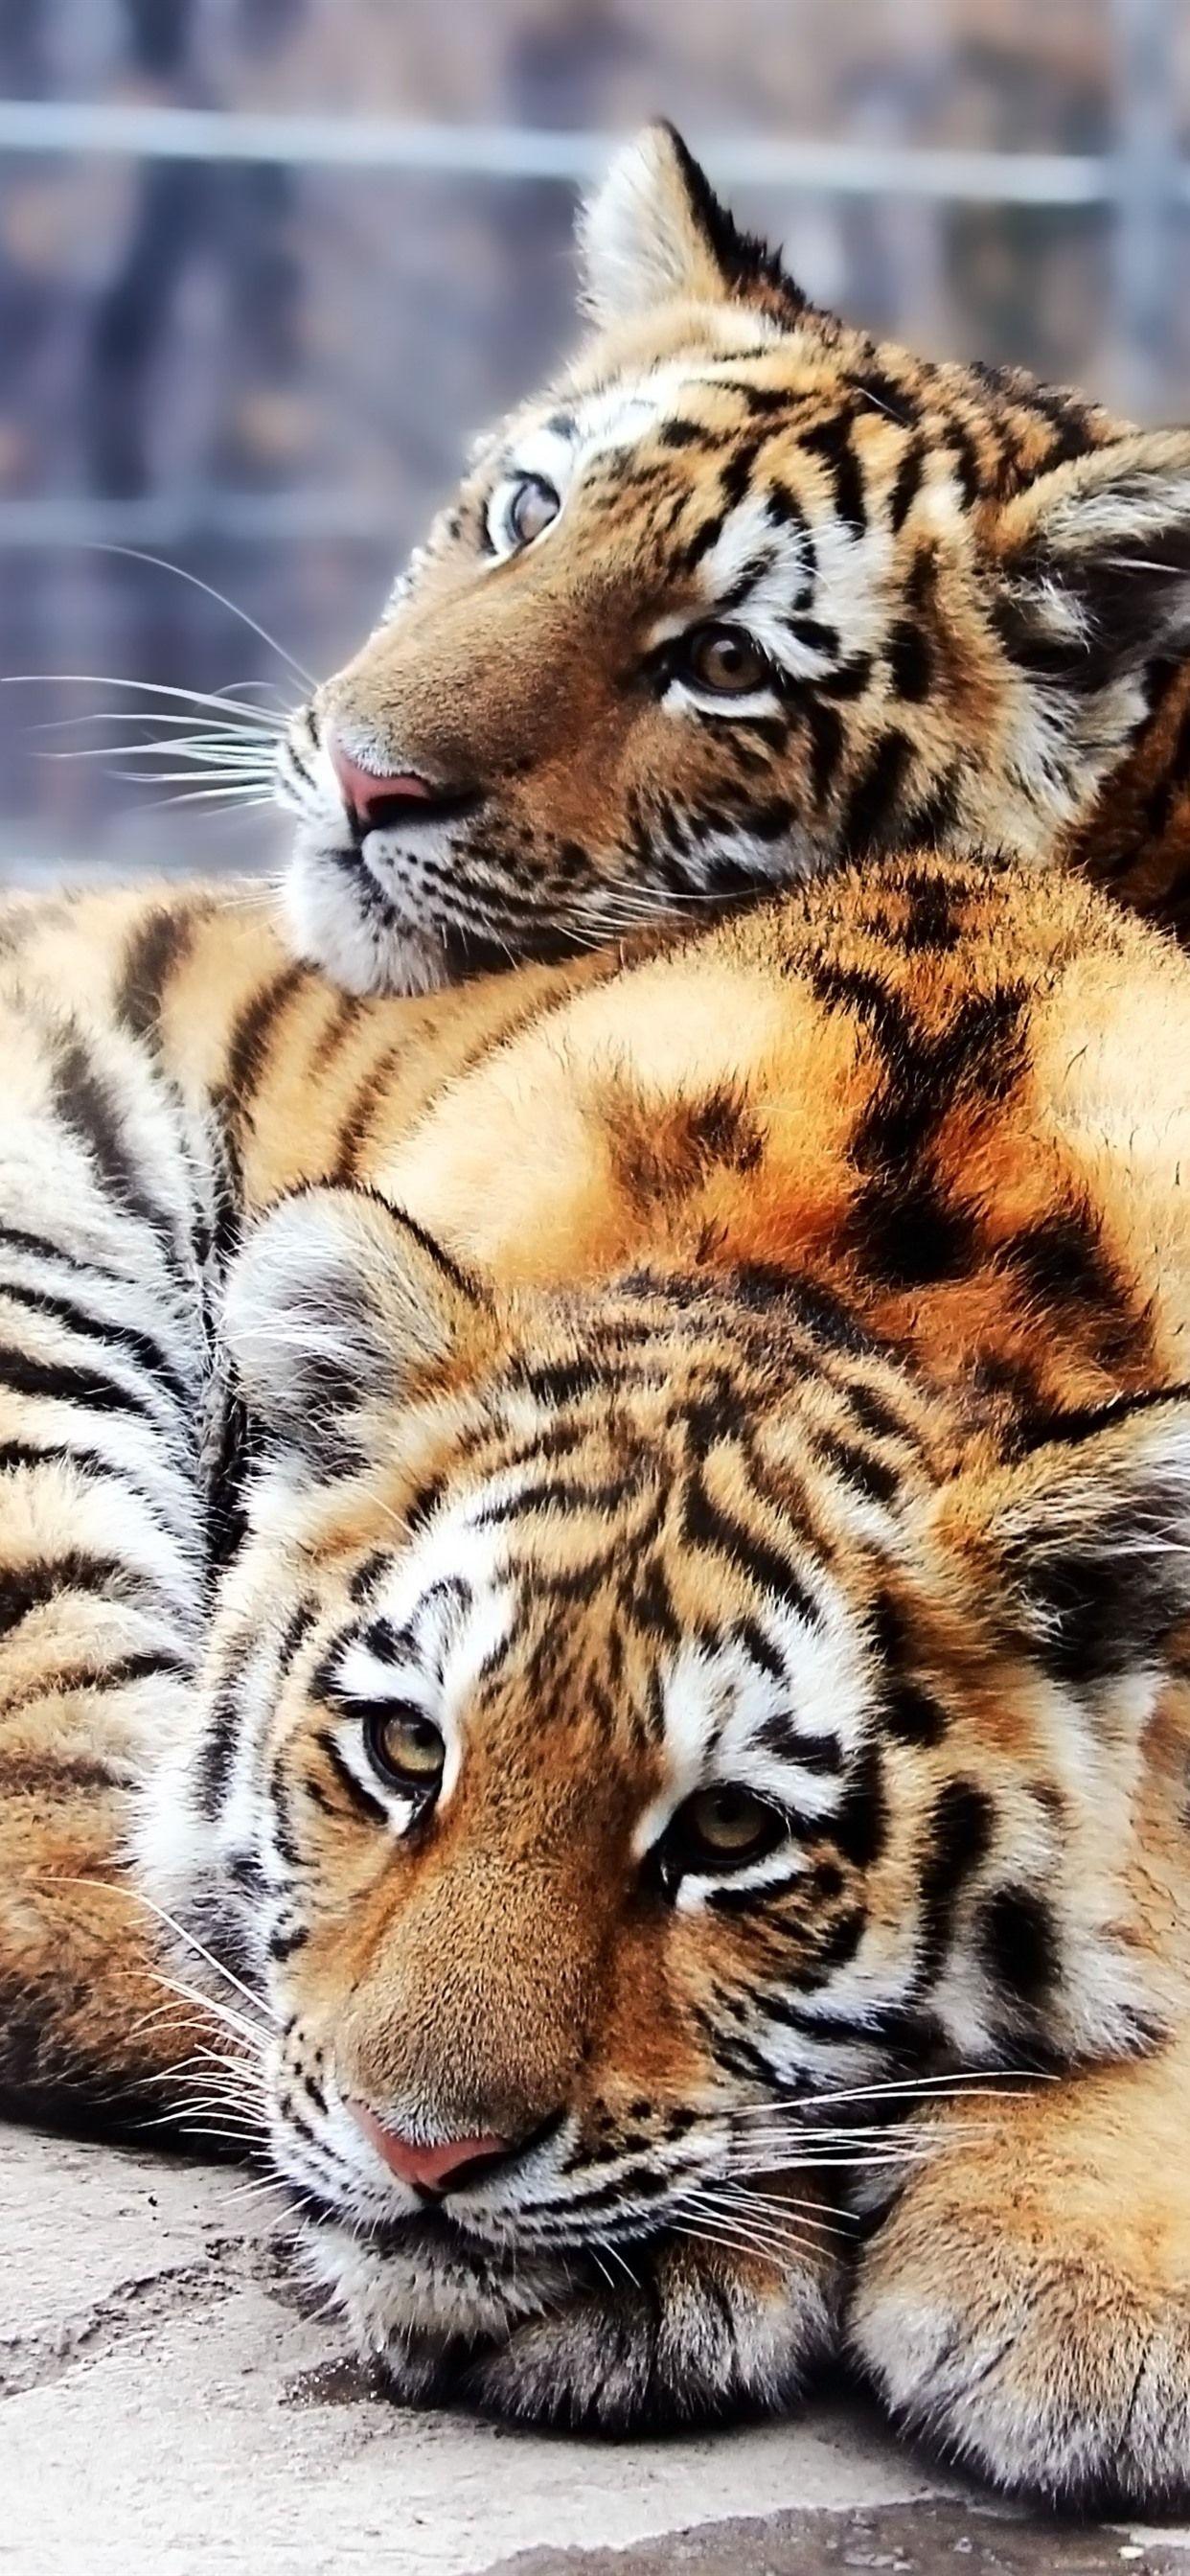 Premium AI Image  Tiger face wallpapers for iphone and android browse all  mobile wallpapers and use them as wallpapers for your iphone android  android and iphone tiger face wallpaper